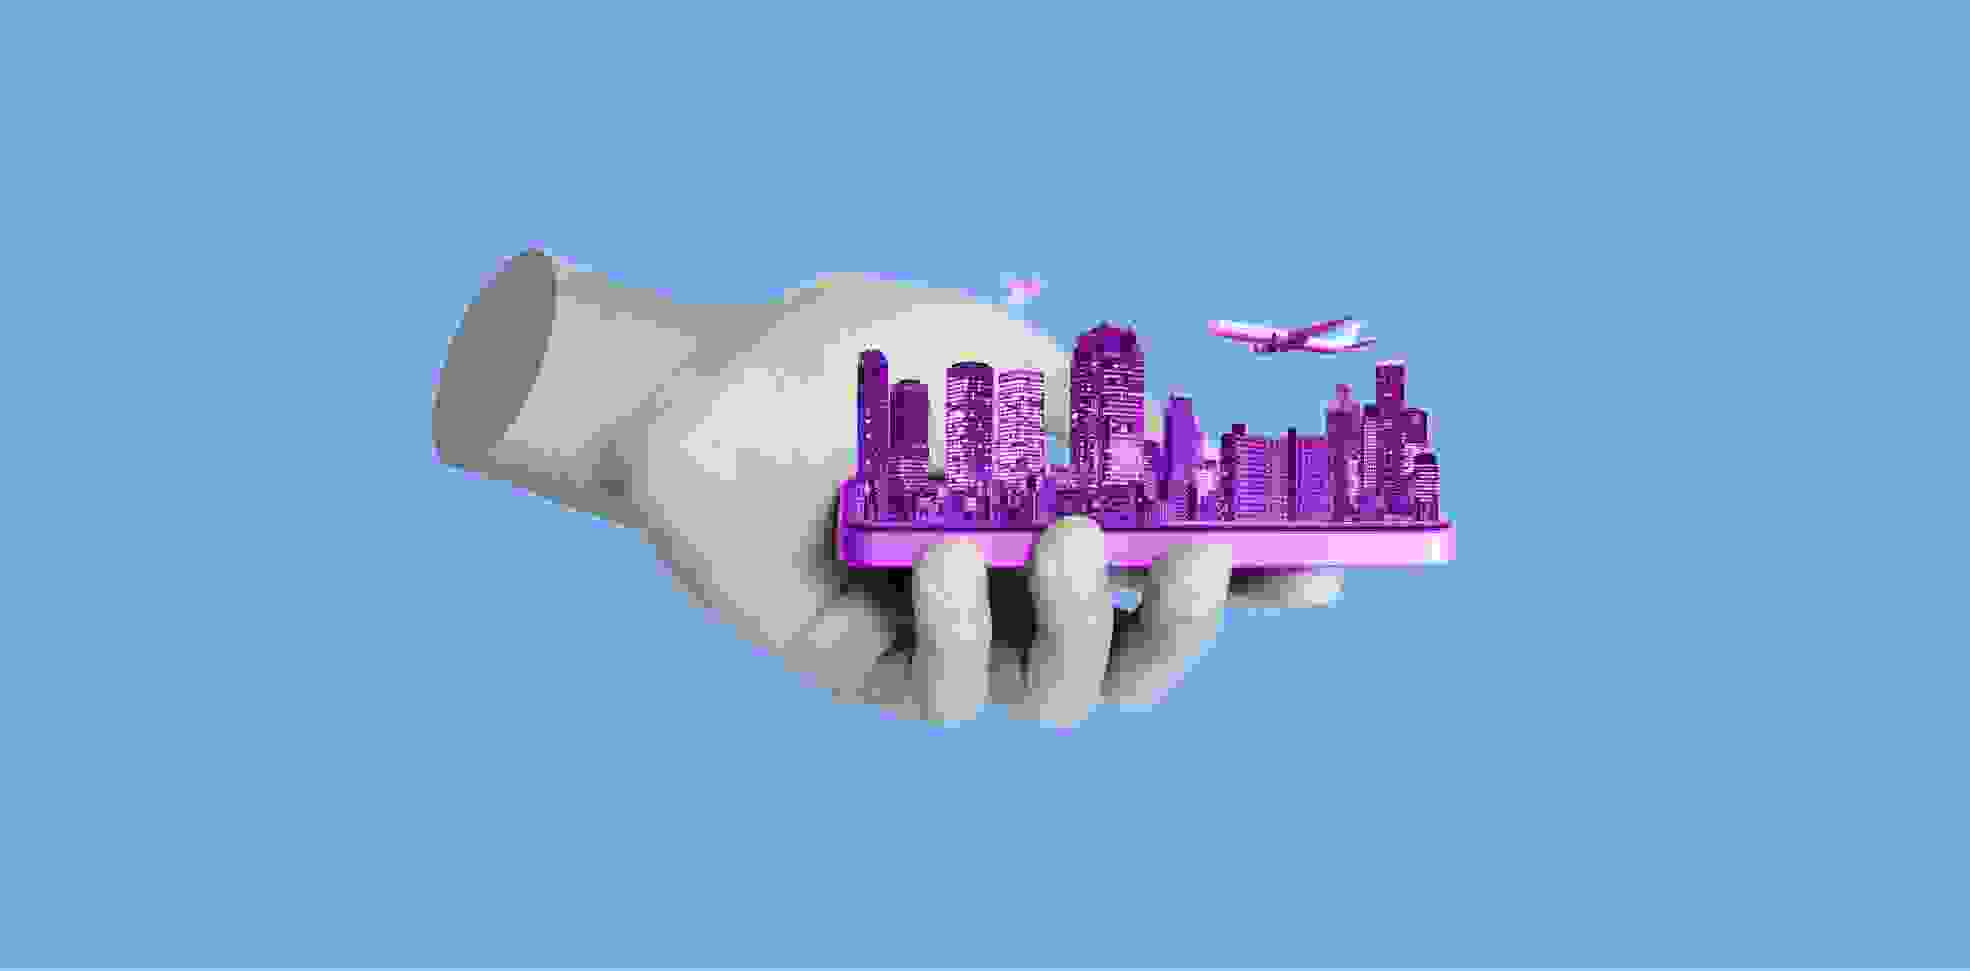 figurine of the city in hand on a blue background